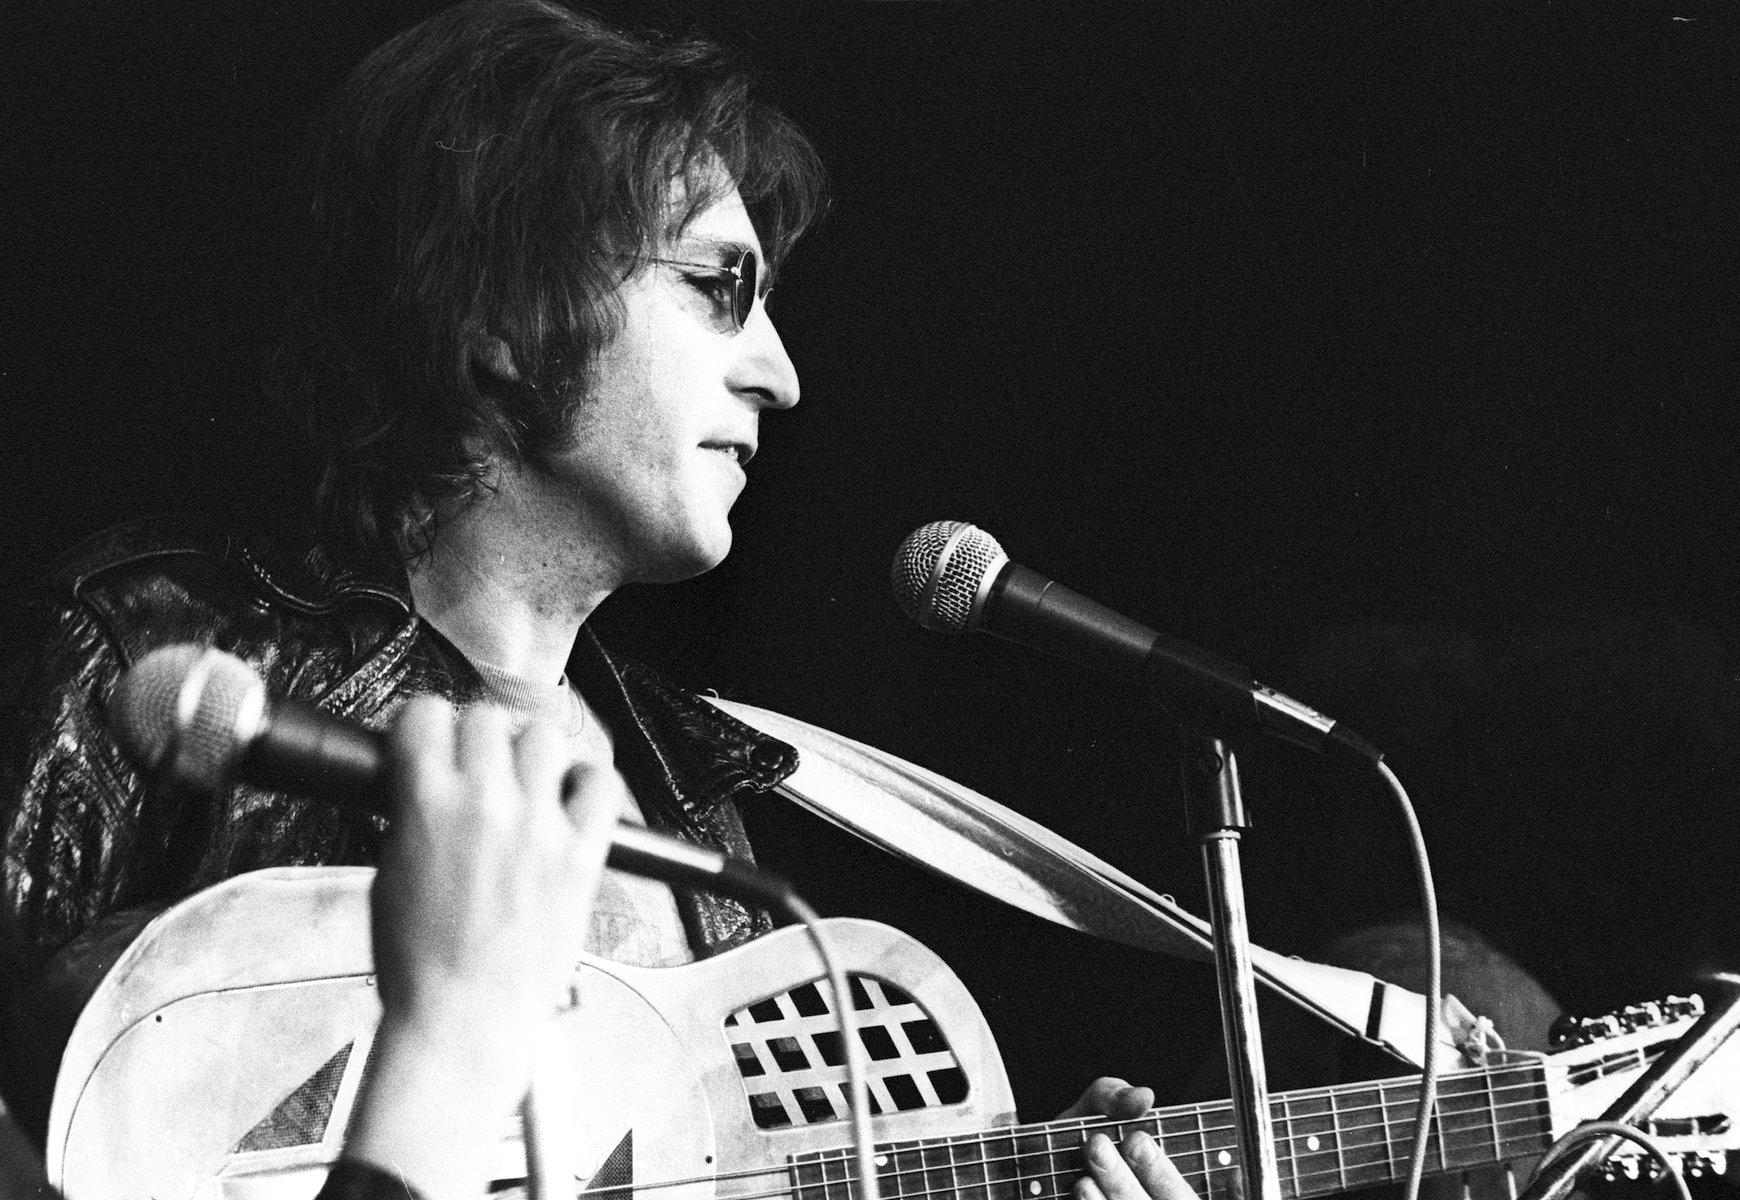 John Lennon performs at the Chrysler Arena in Michigan in 1971